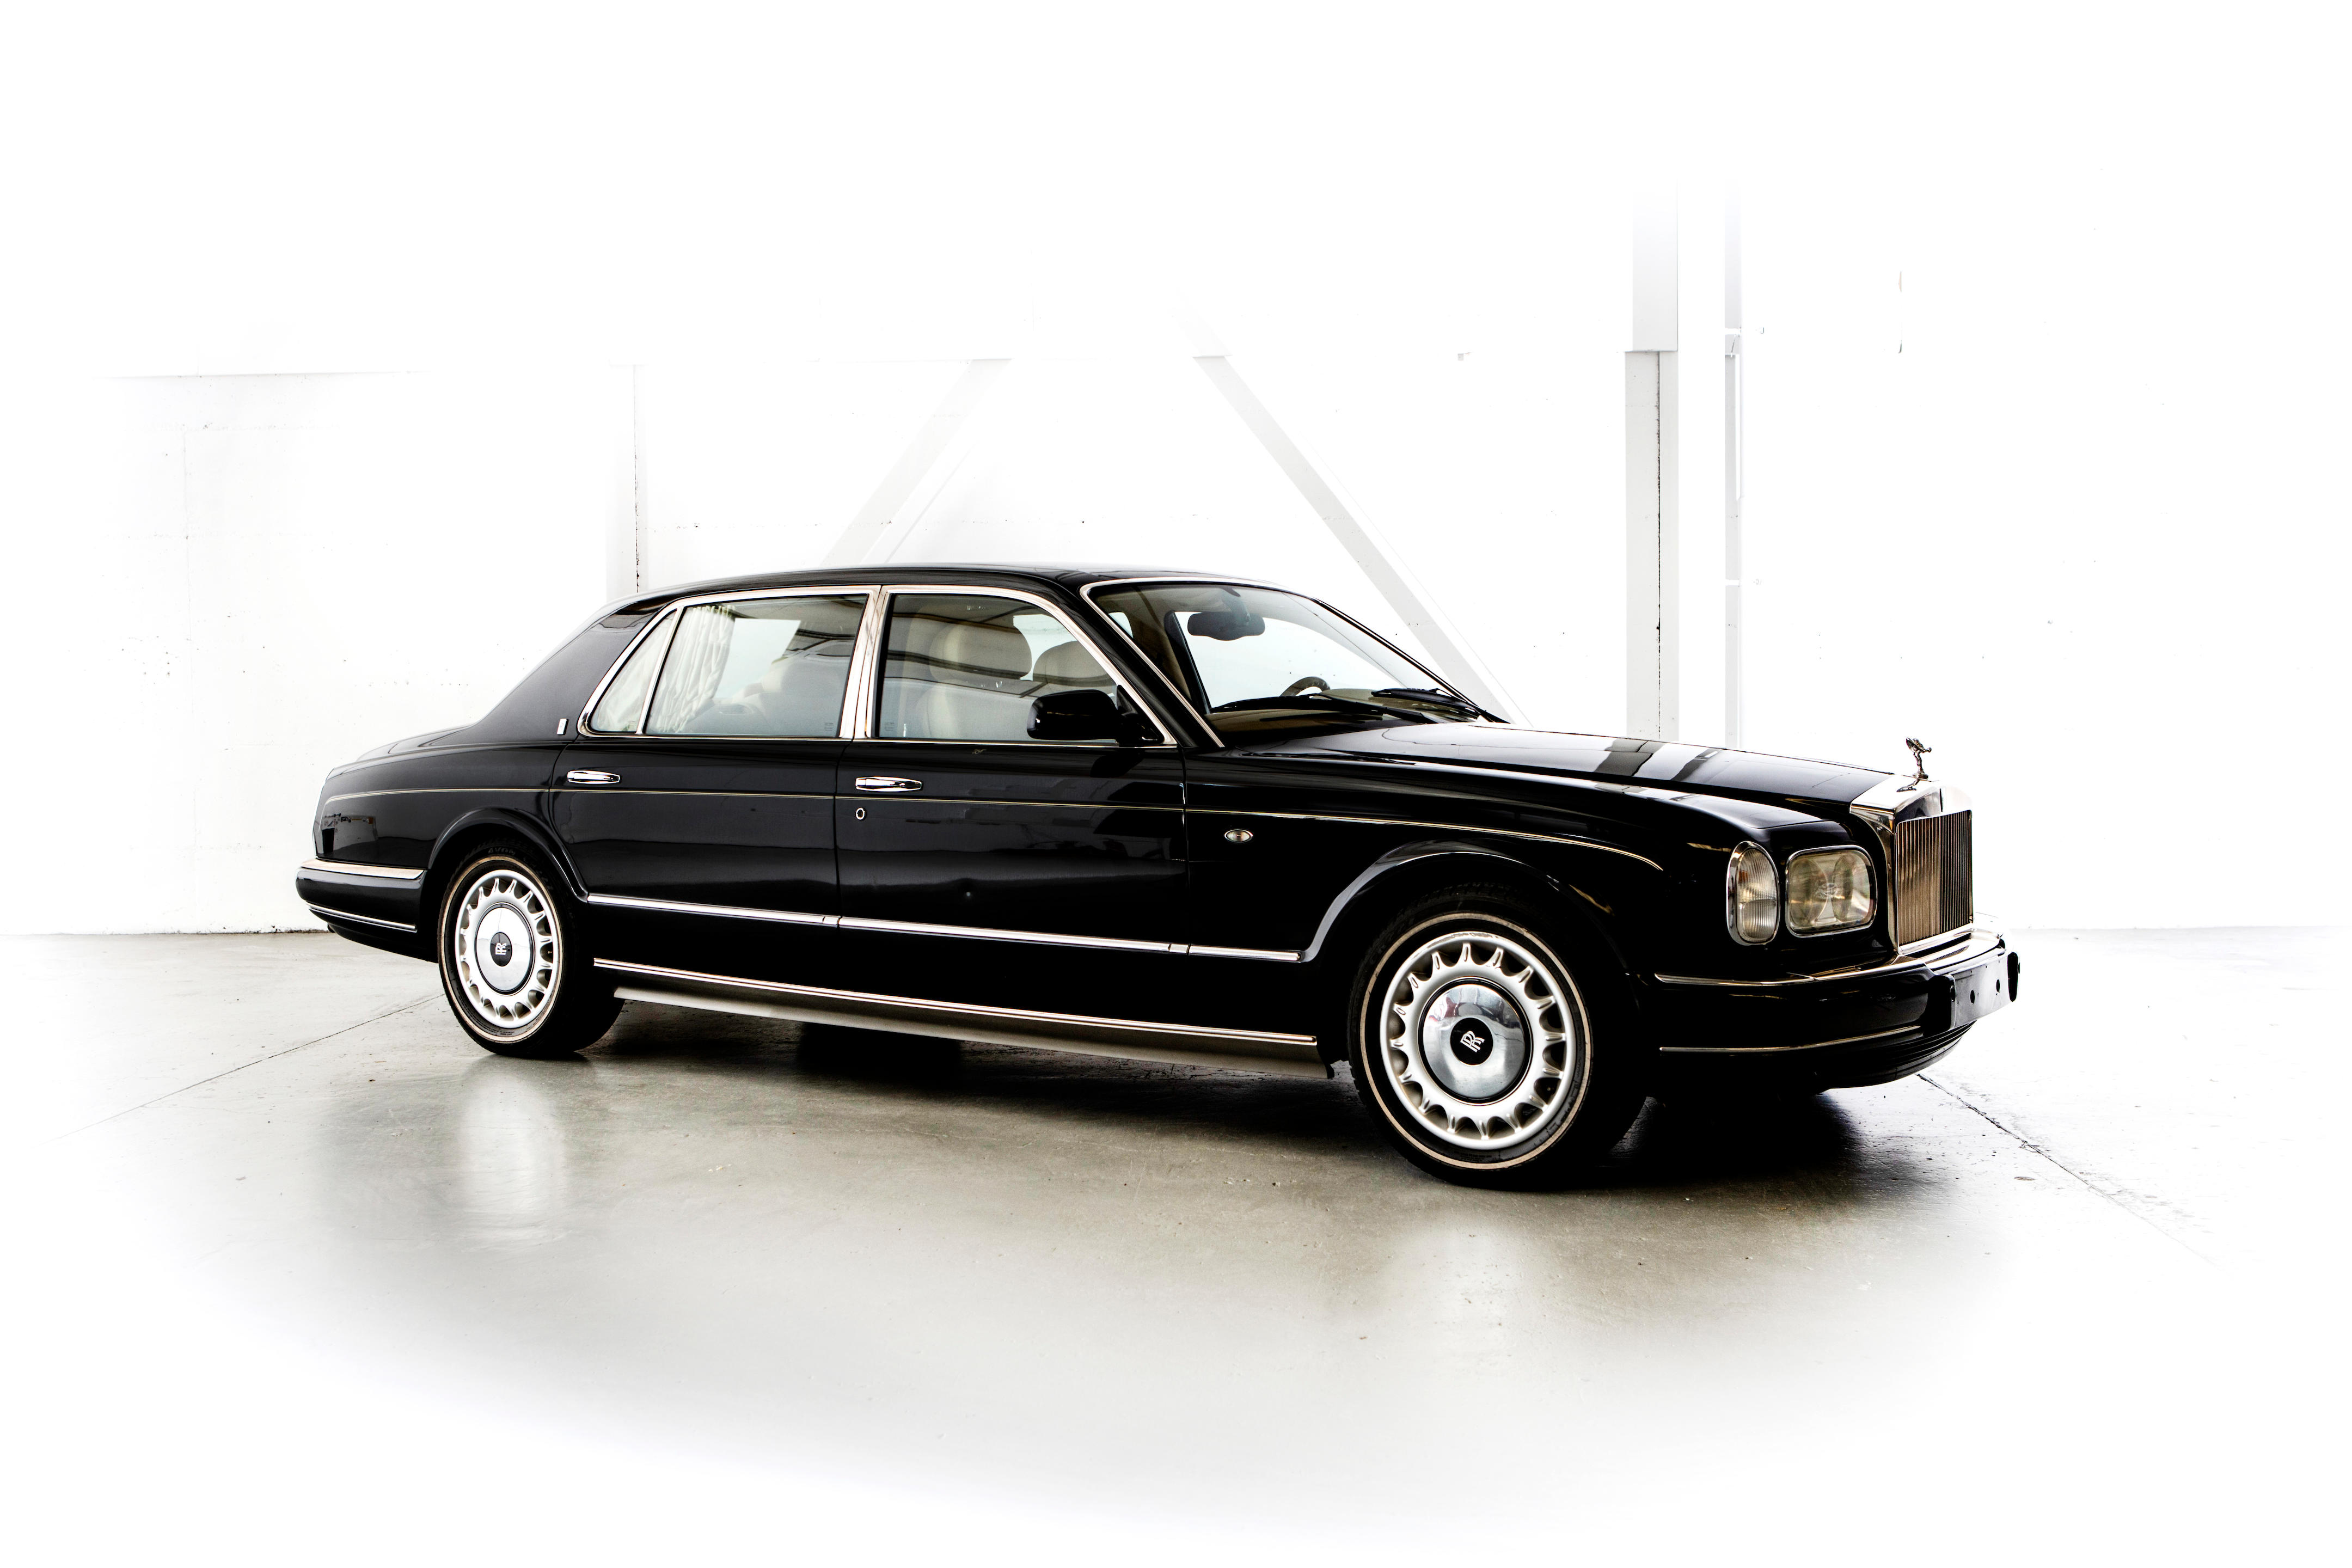 2002 Rolls Royce Silver Seraph Long Wheelbase Saloon Auctions And Price